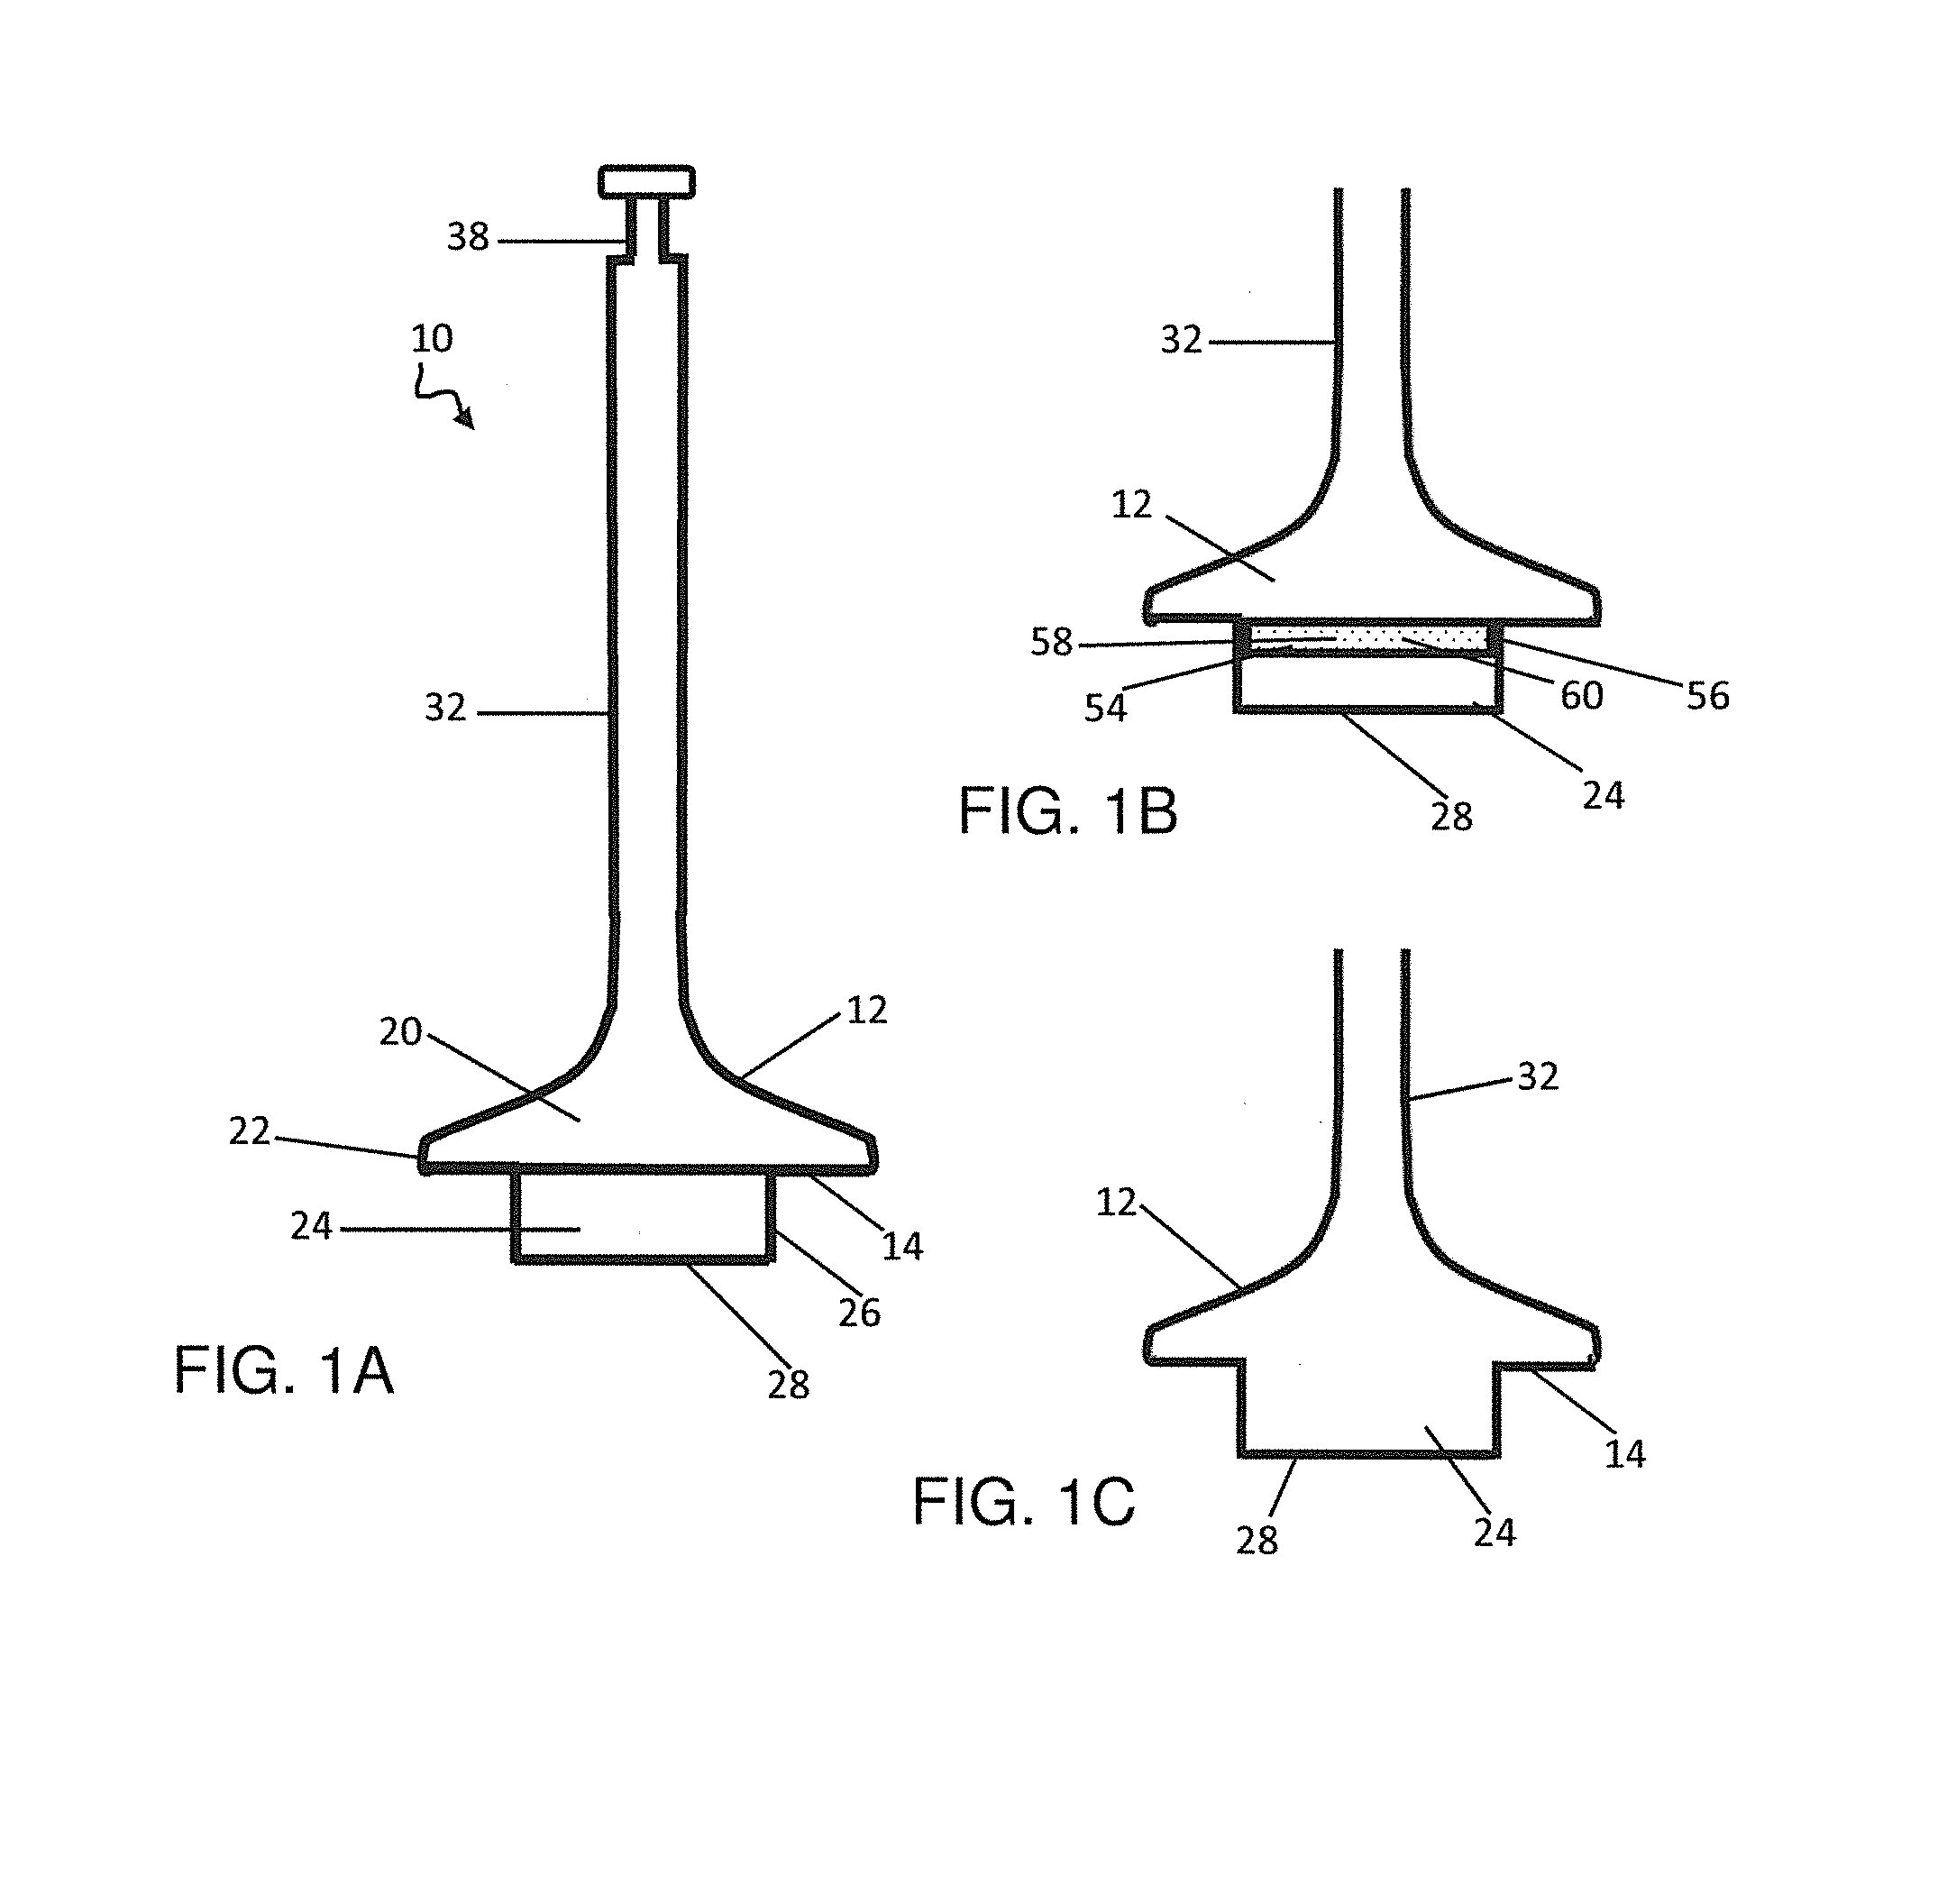 Heat transferring engine valve for fuel conservation